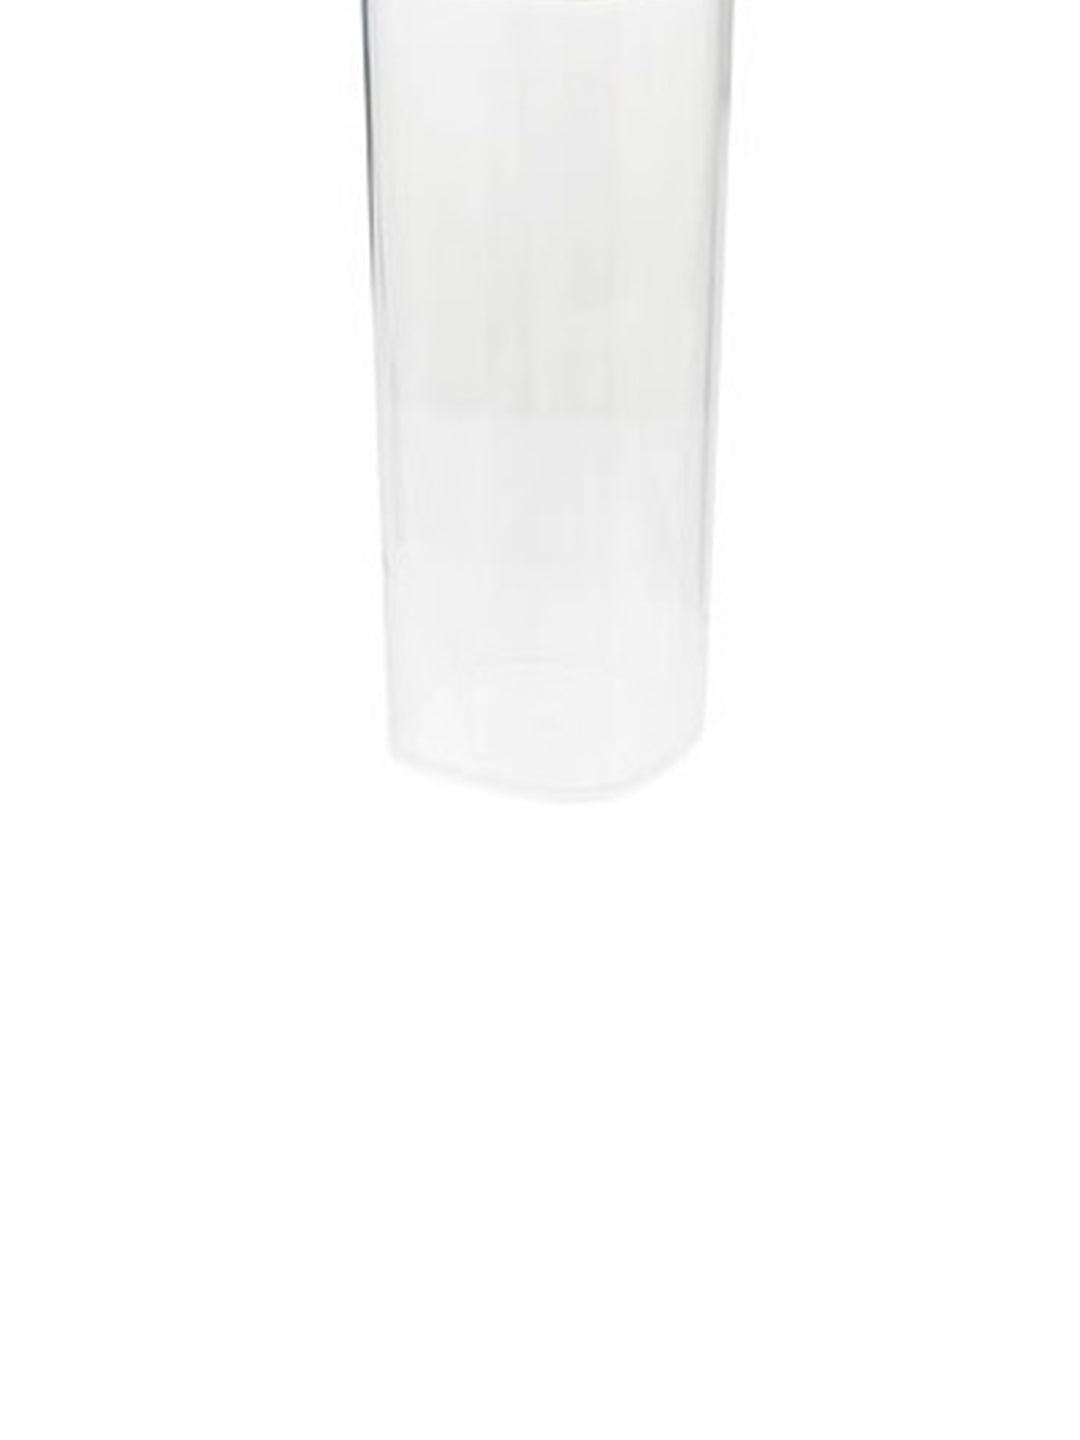 Market 99 Kitchen Cabinet Tall Airtight Plastic Containers - MARKET 99